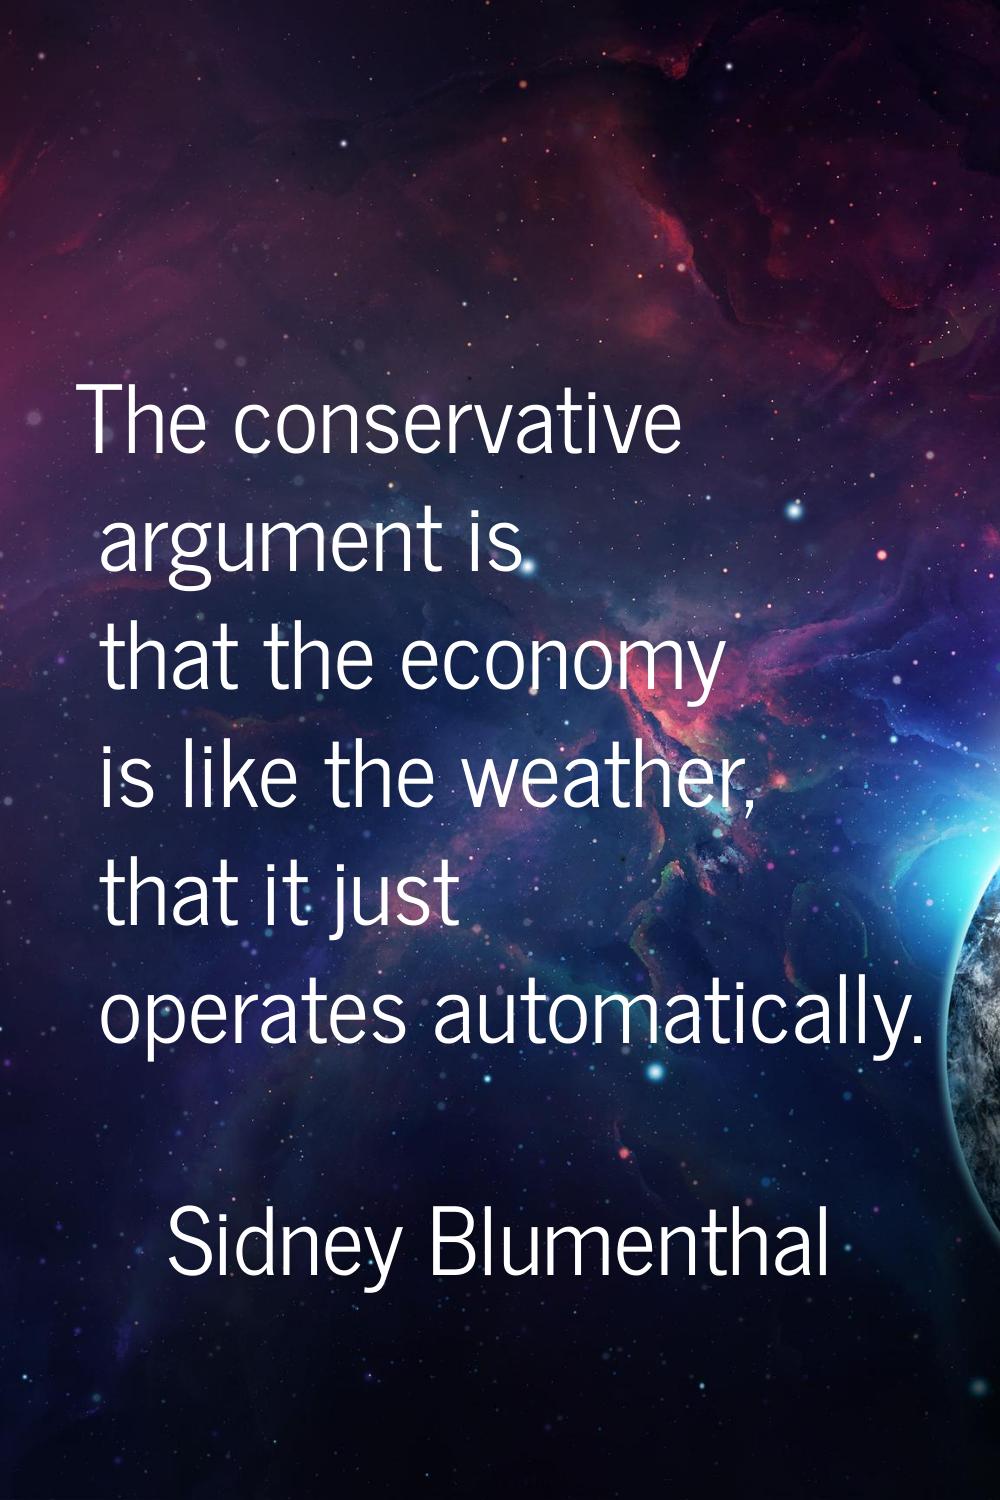 The conservative argument is that the economy is like the weather, that it just operates automatica